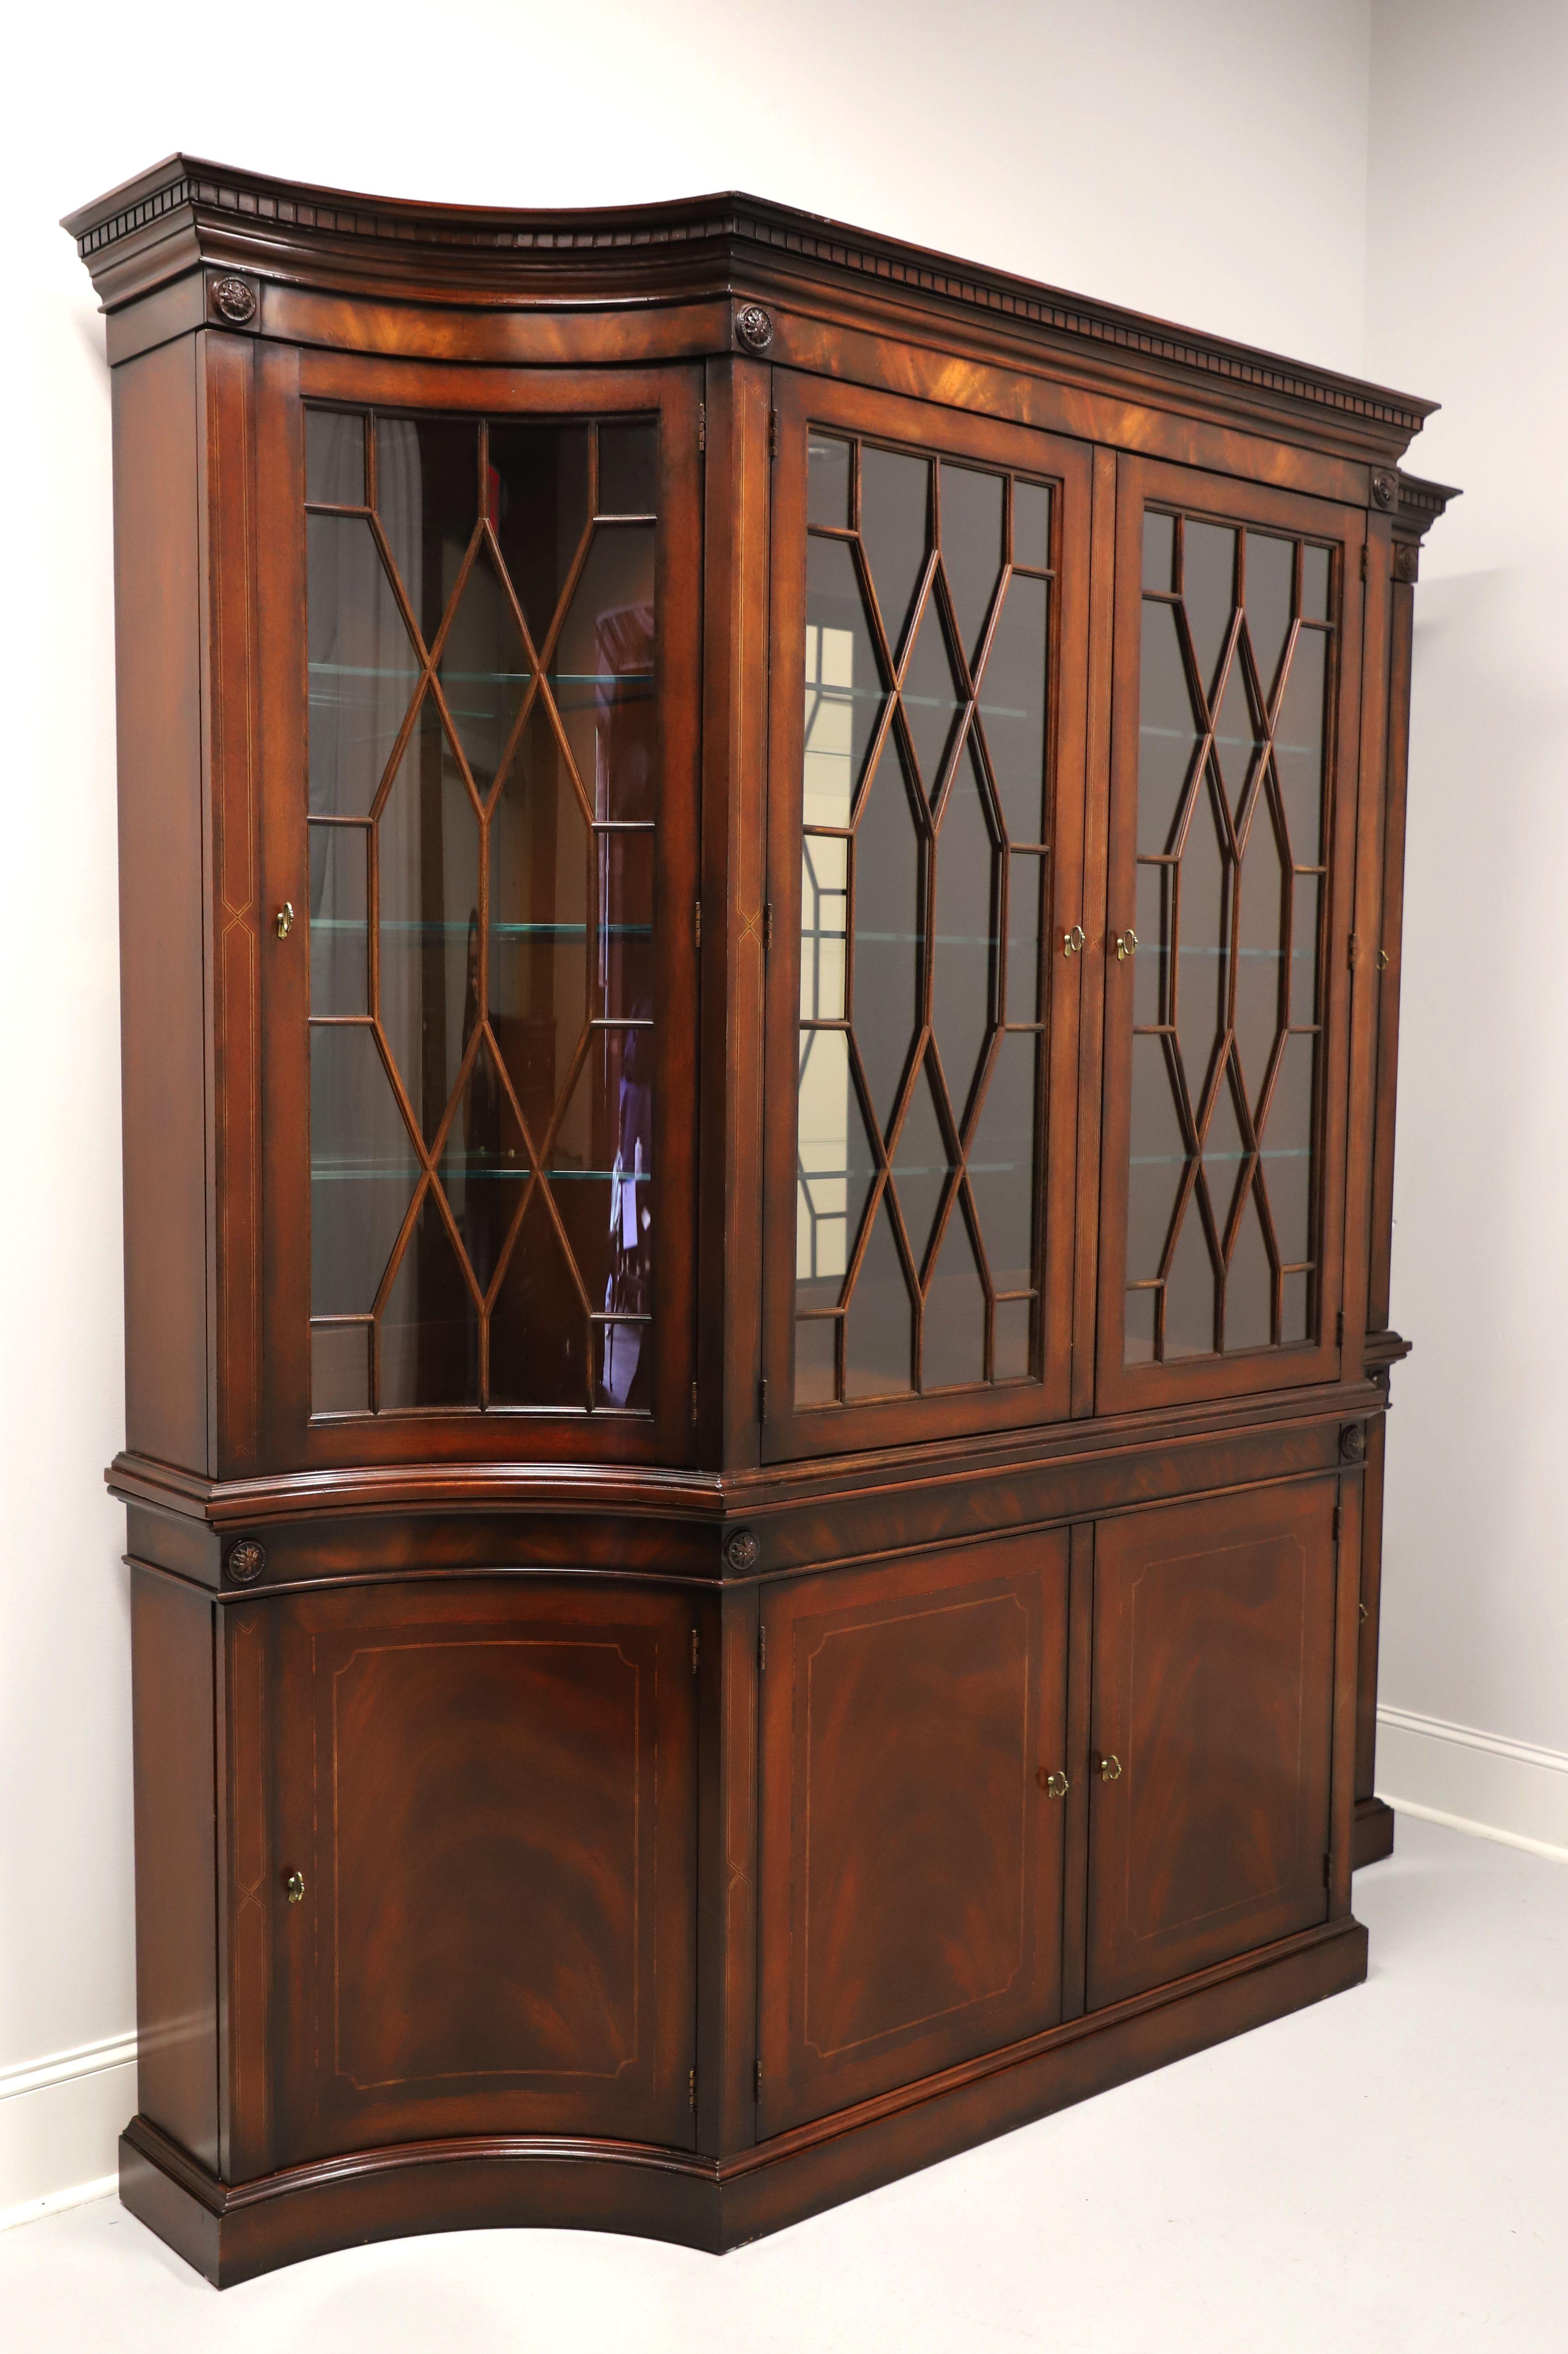 A china display cabinet in the Regency style by Henredon. Mahogany with inlaid flame mahogany, unique curved inward sides breakfront design, distinctive crown molding with dentils, brass hardware & brass medallion ornamentation, ogee edge at middle